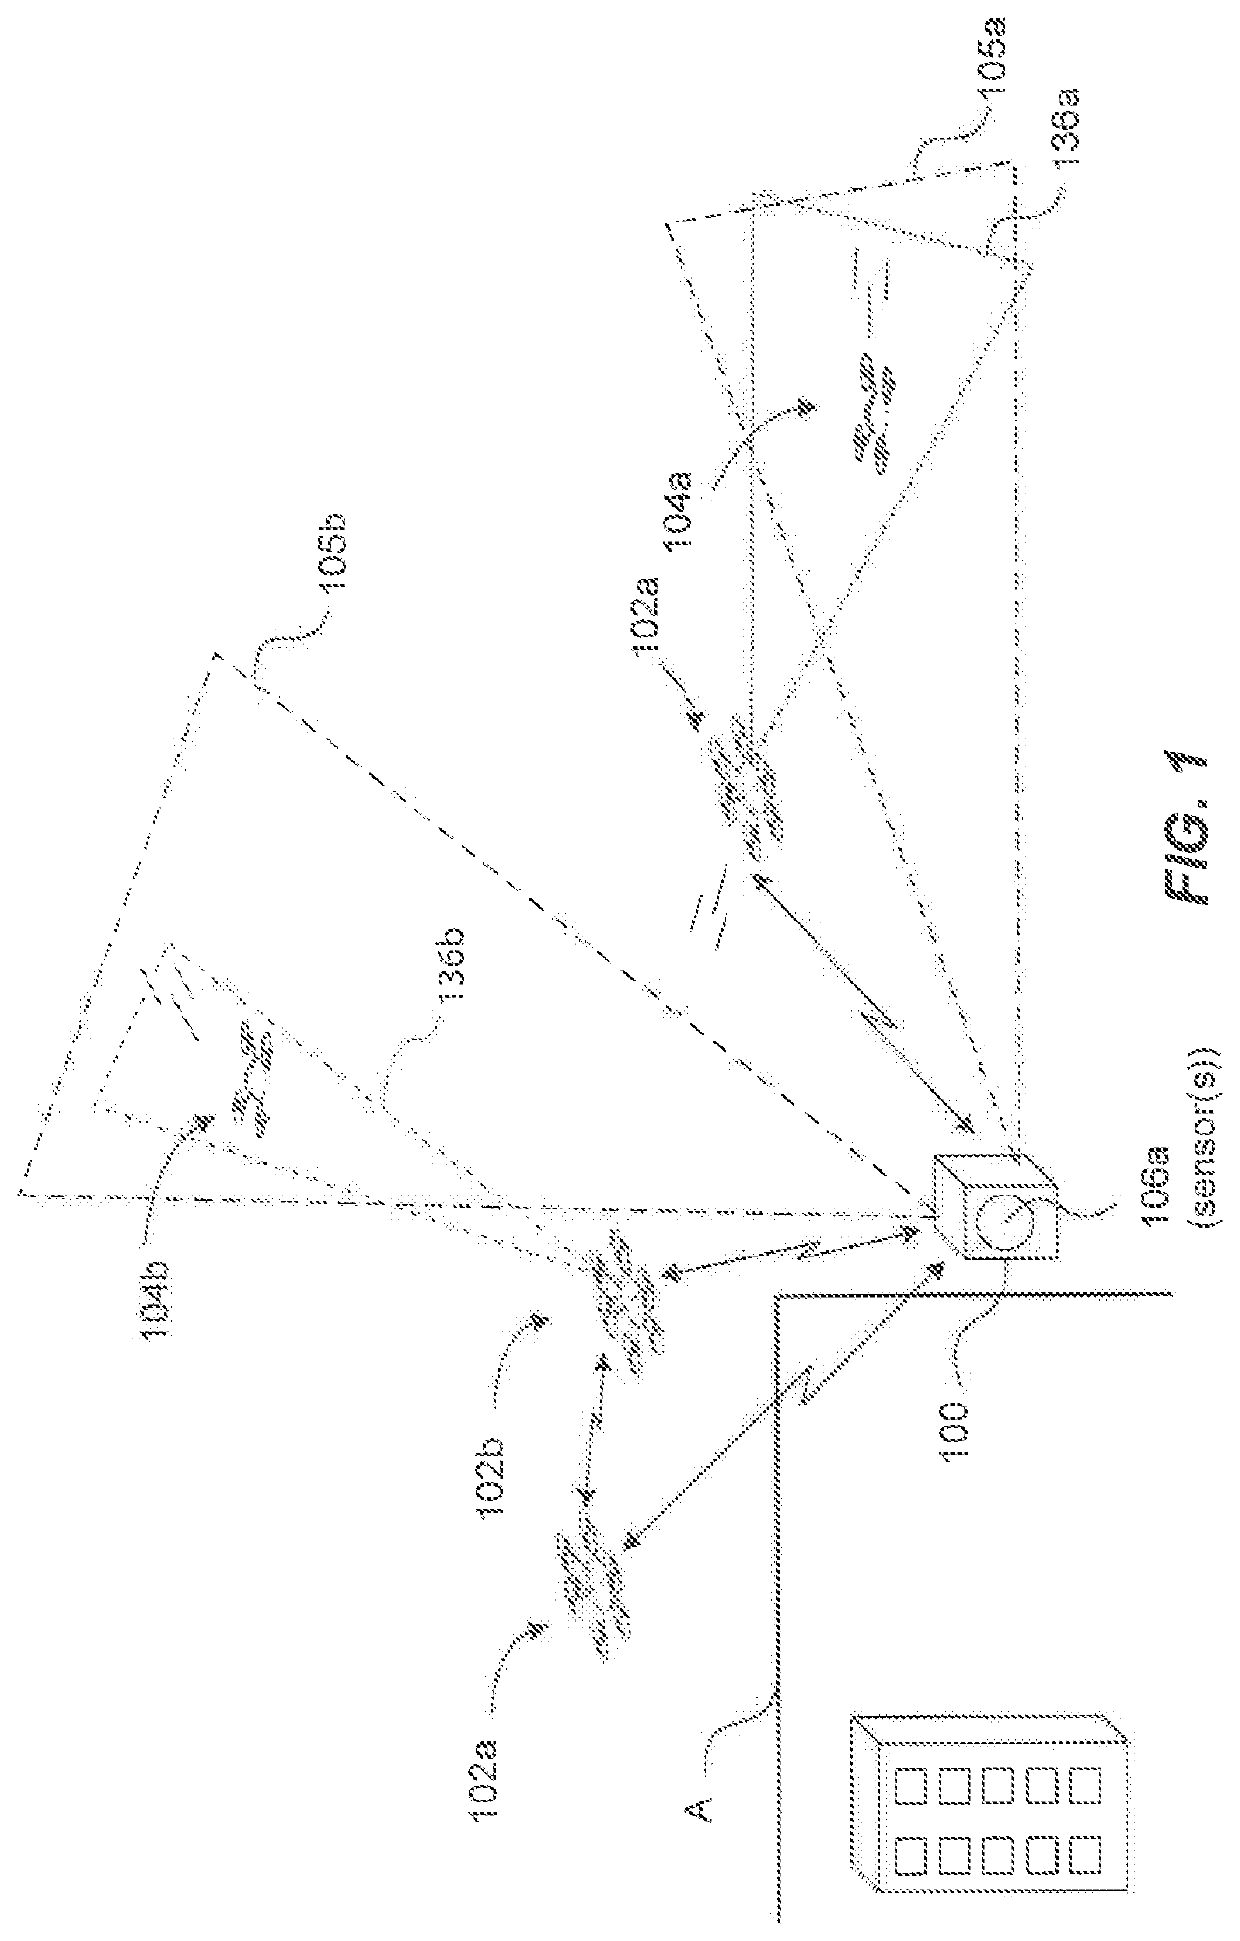 Close Proximity Countermeasures for Neutralizing Target Aerial Vehicles